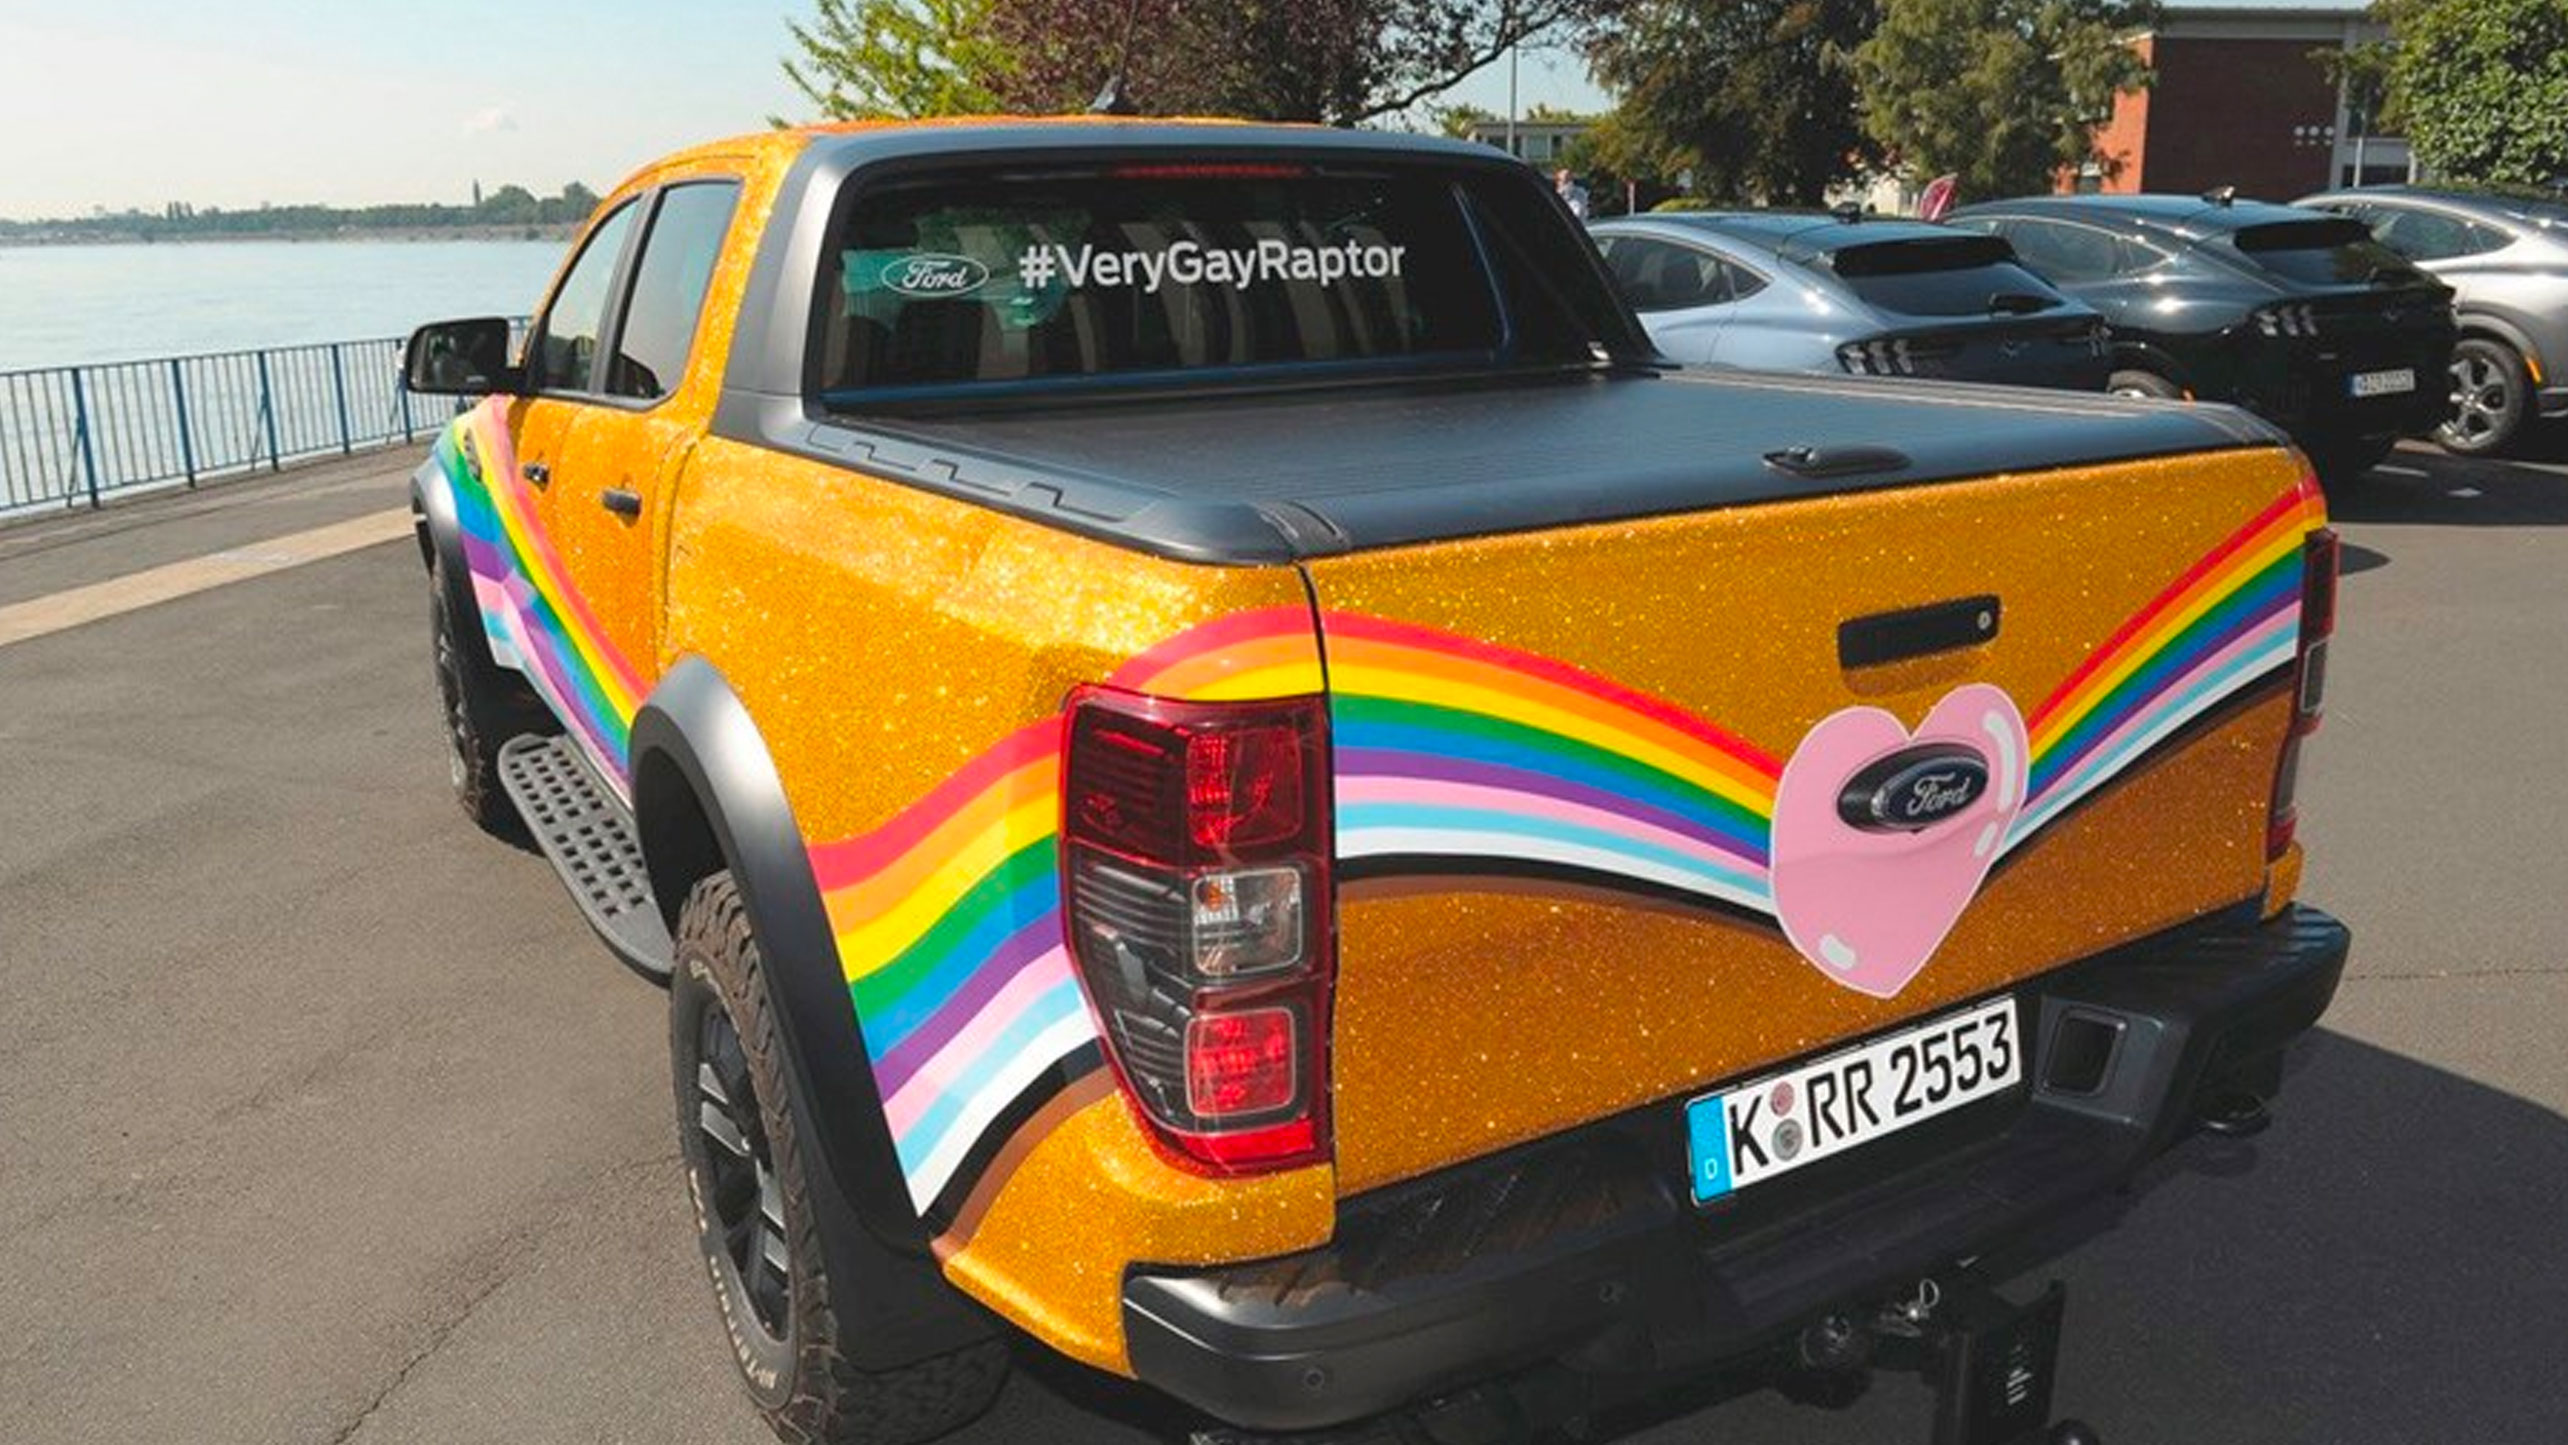 Ford's Very Gay Raptor truck